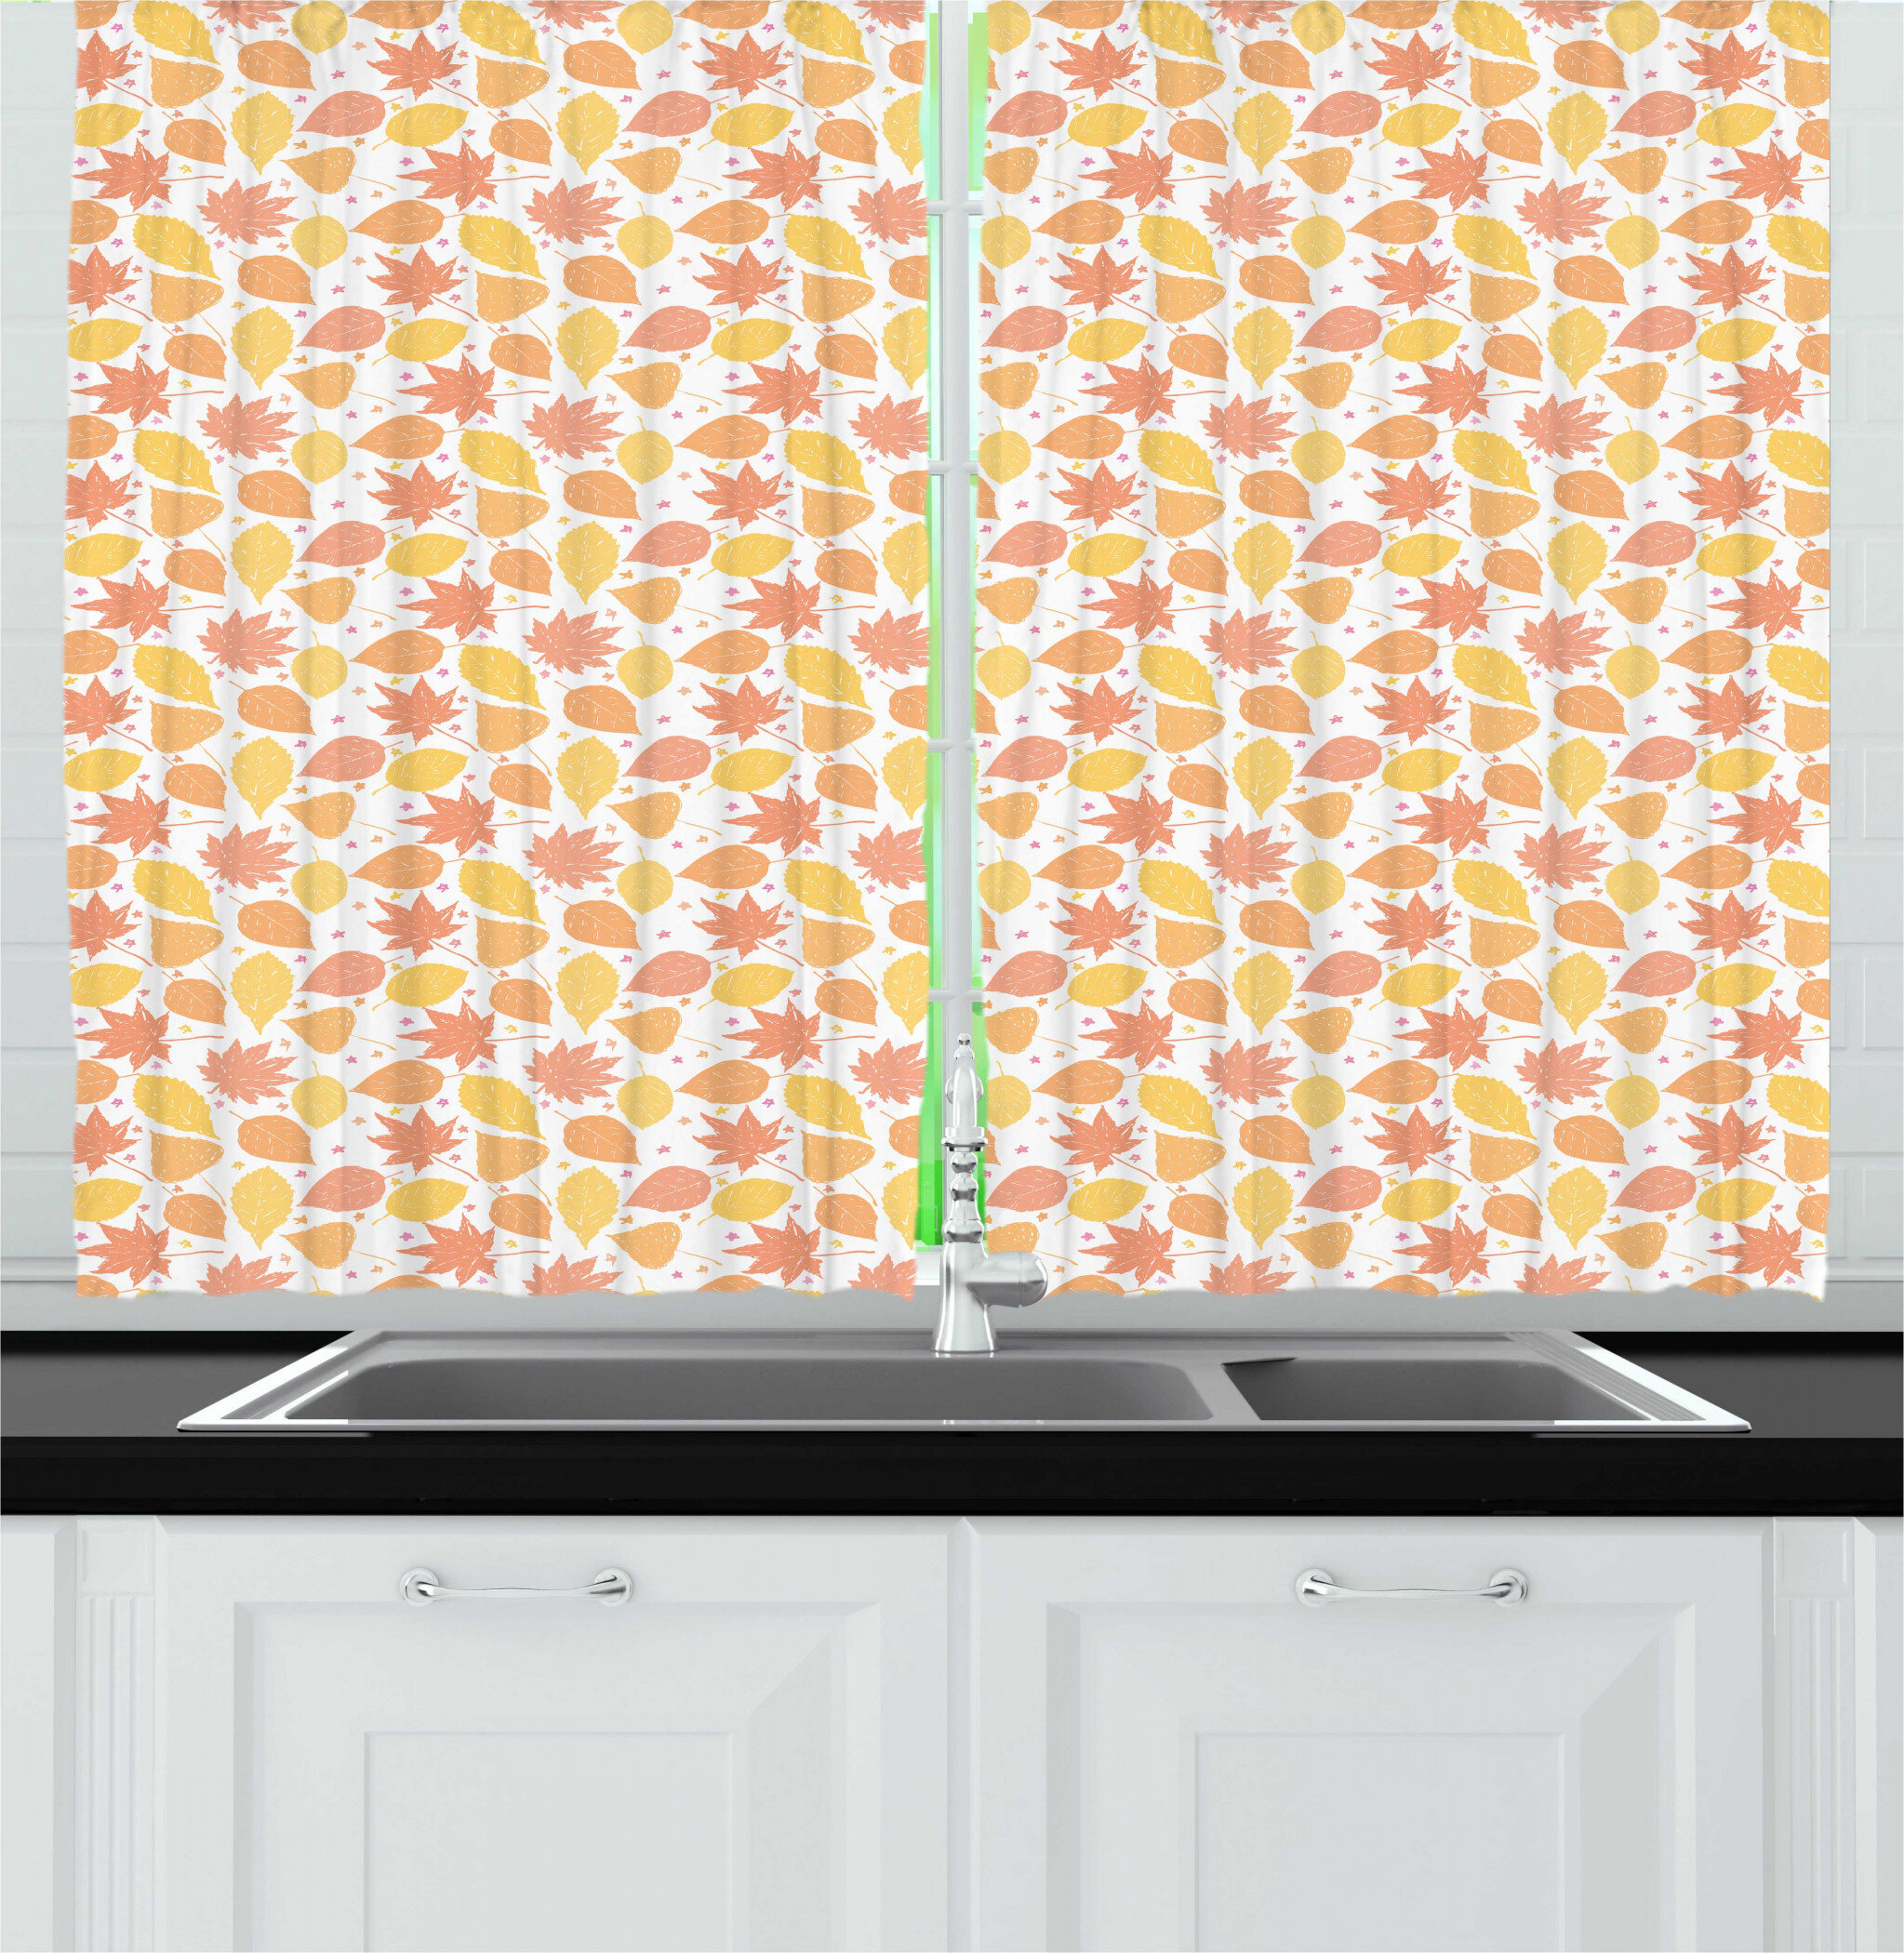 East Urban Home Orange And Yellow Soft Colored Autumn Leaves And Tiny Stars In Doodle Style Kitchen Curtain Wayfair